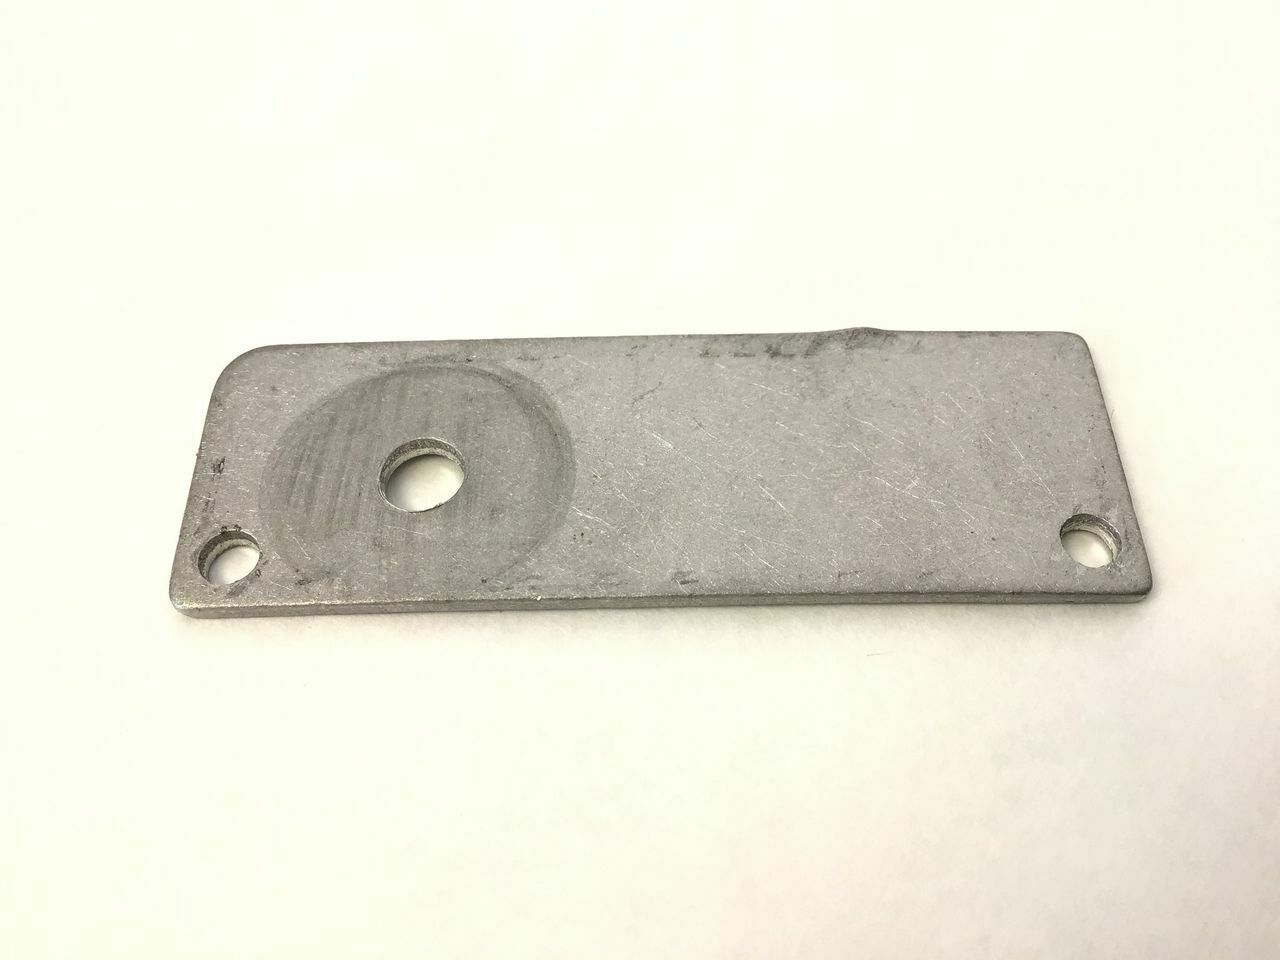 Rear End Cap Plate (Used)